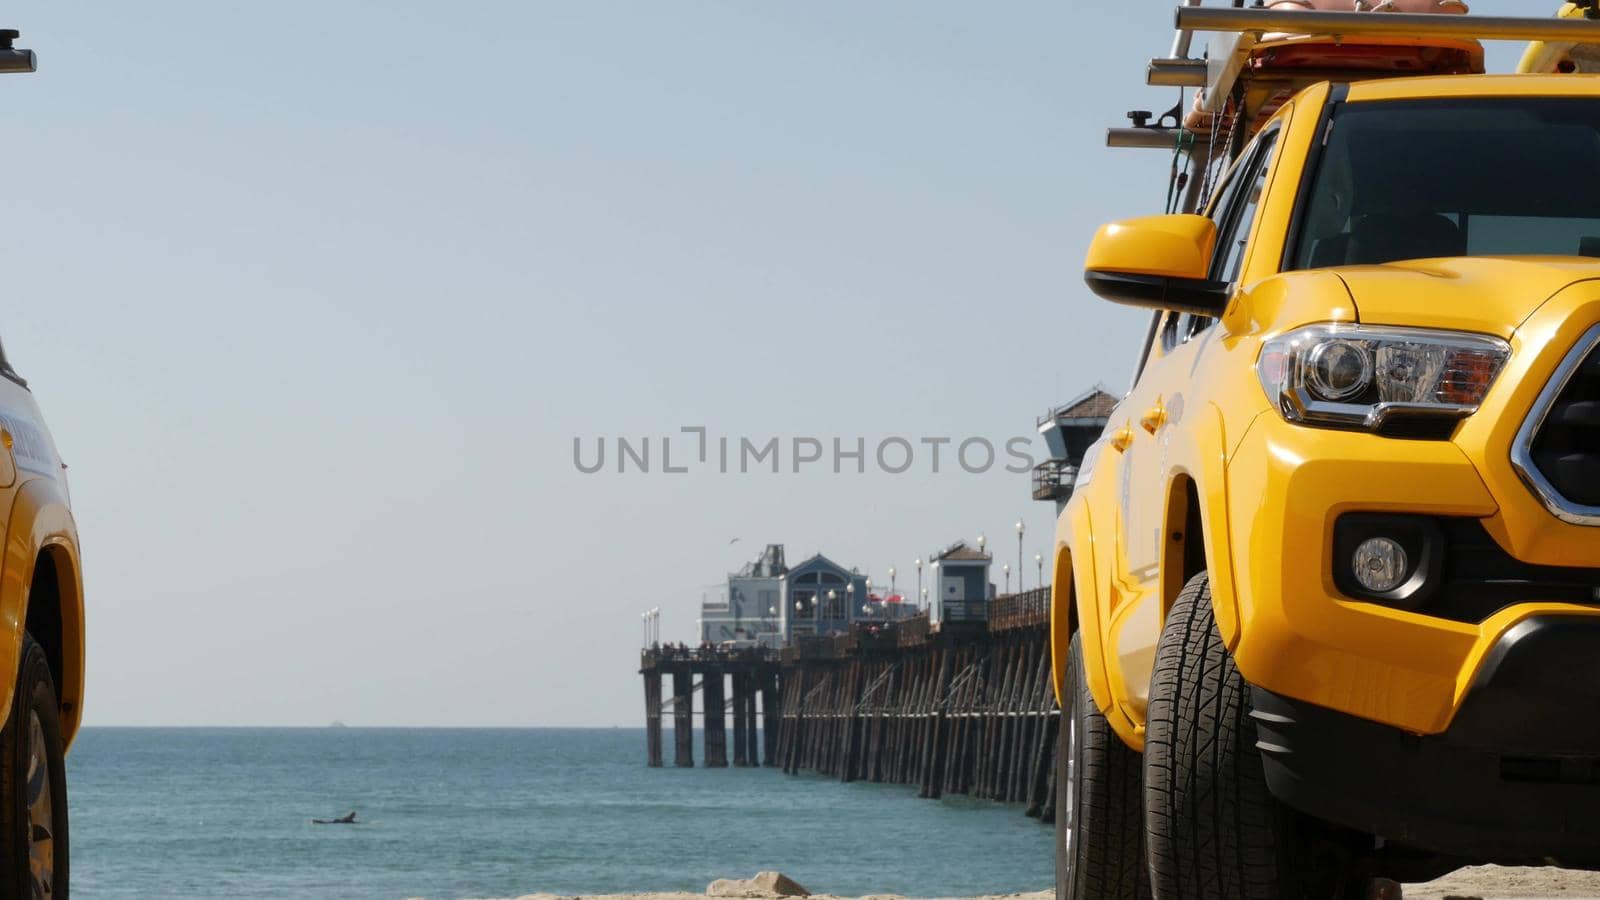 Yellow lifeguard car, Oceanside beach, California USA. Coastline rescue life guard pick up truck, lifesavers vehicle. Iconic auto and ocean coast. Los Angeles vibes, summertime aesthetic atmosphere.